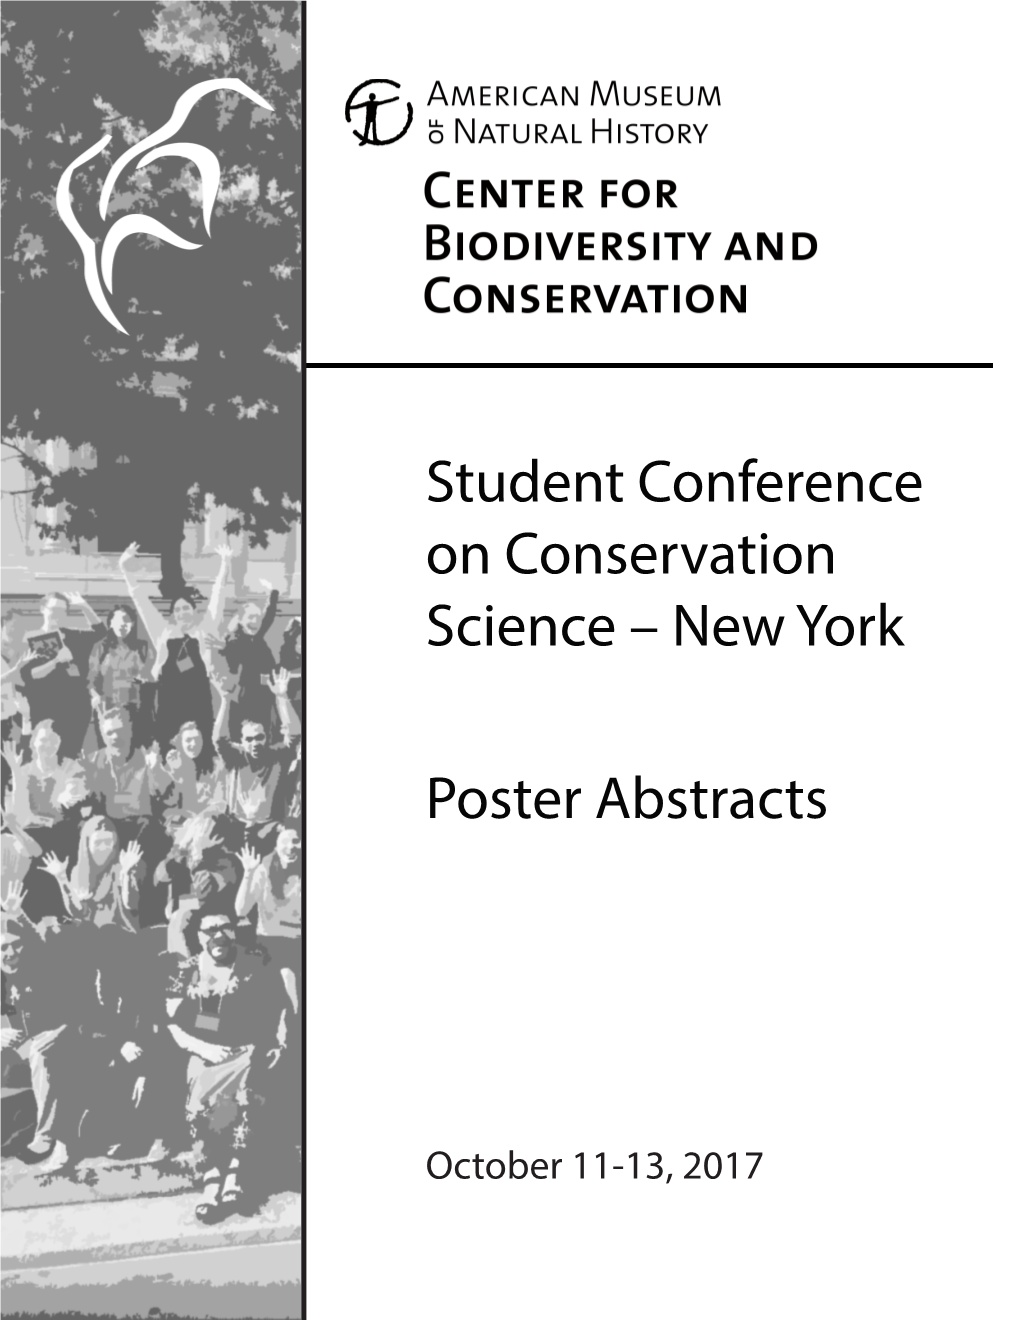 New York Poster Abstracts